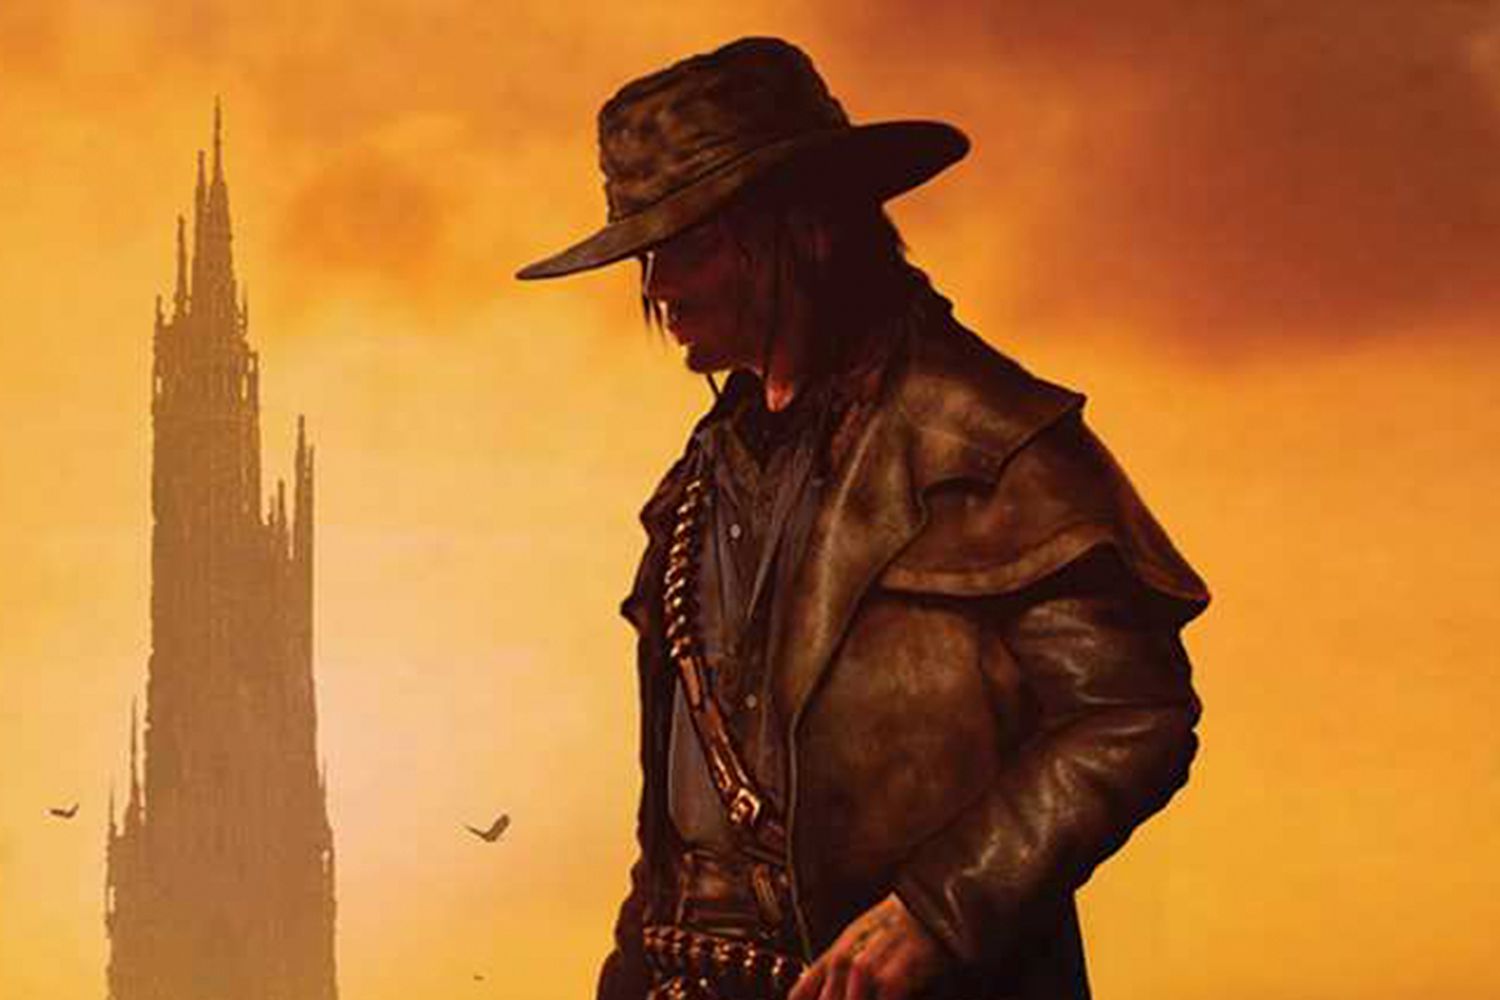 The Dark Tower I by Stephen King